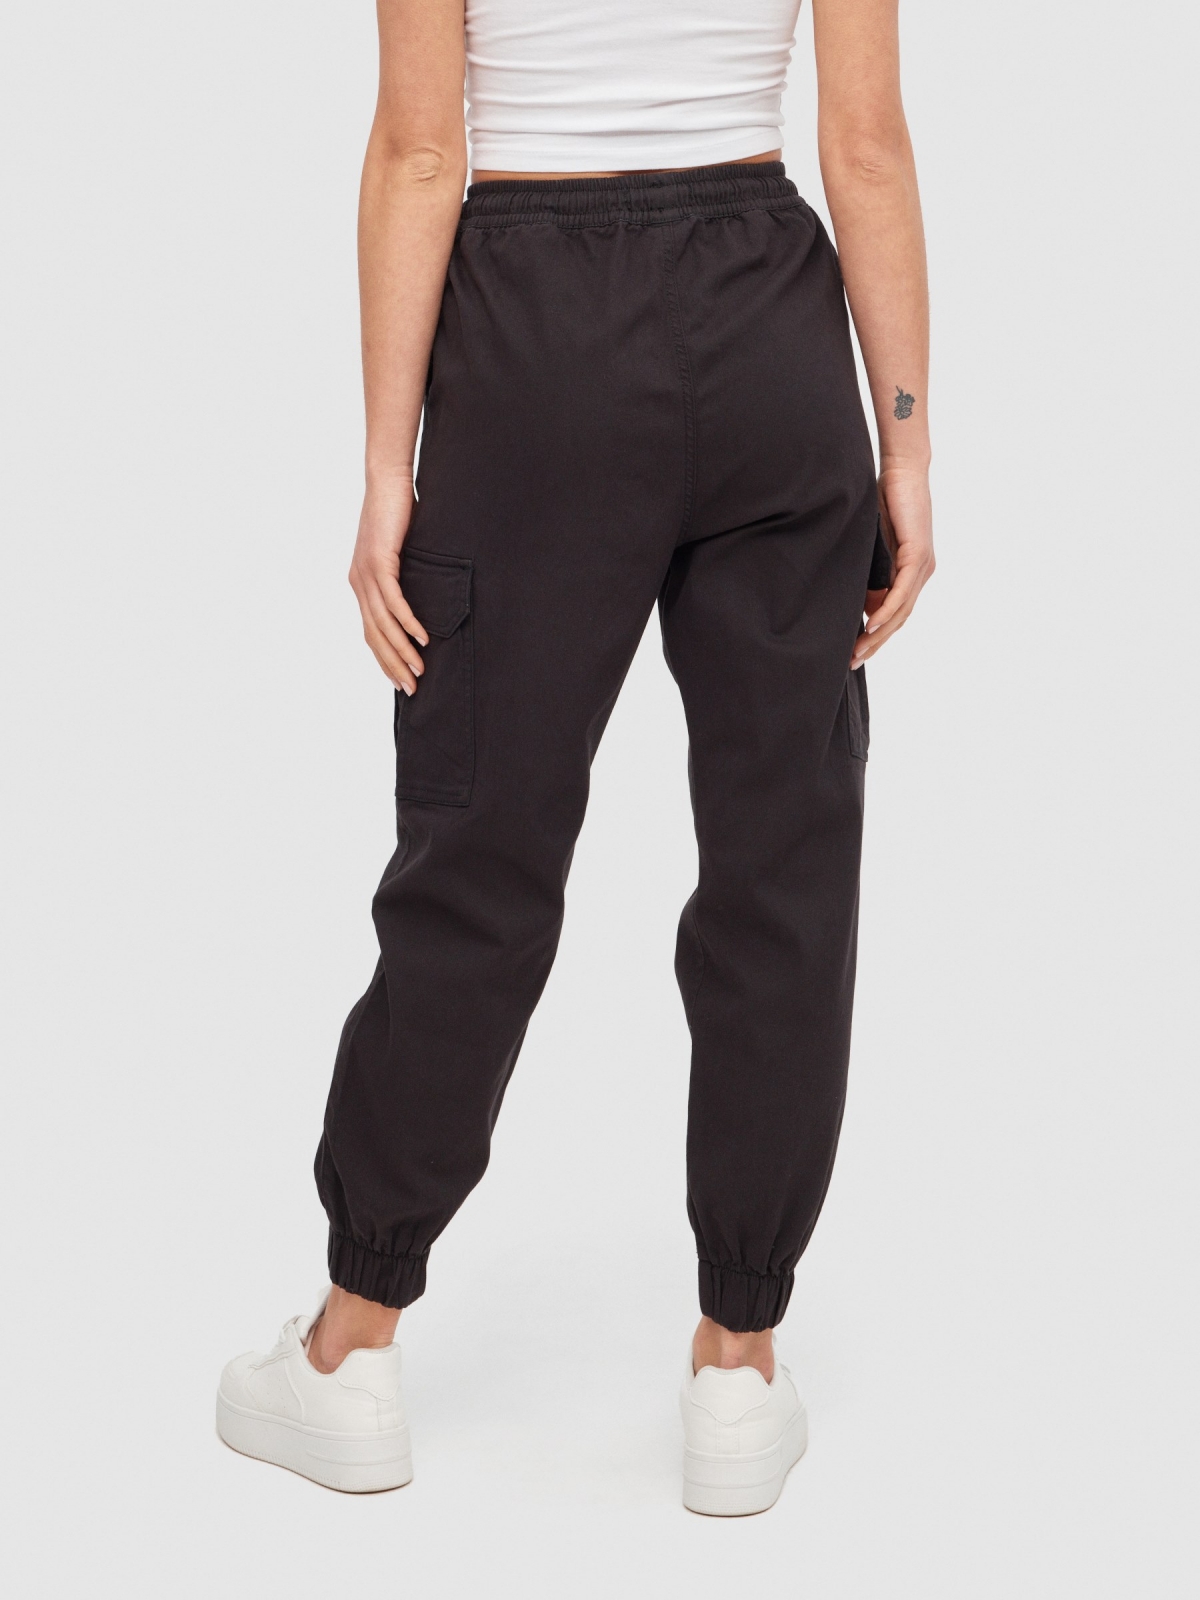 High rise cargo jogger pants black middle back view